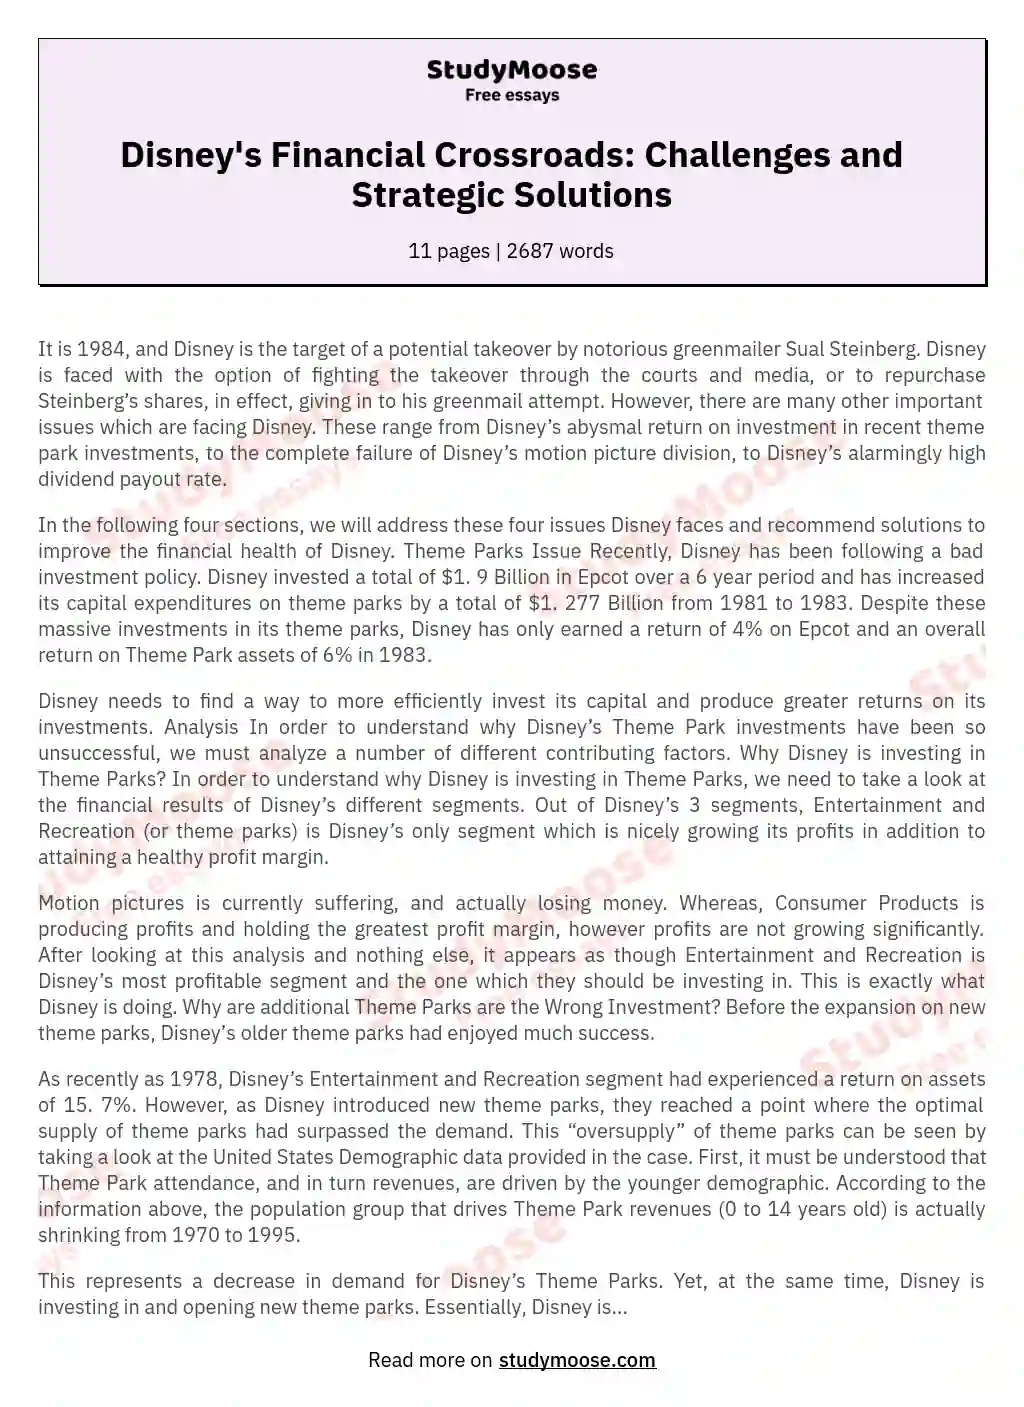 Disney's Financial Crossroads: Challenges and Strategic Solutions essay